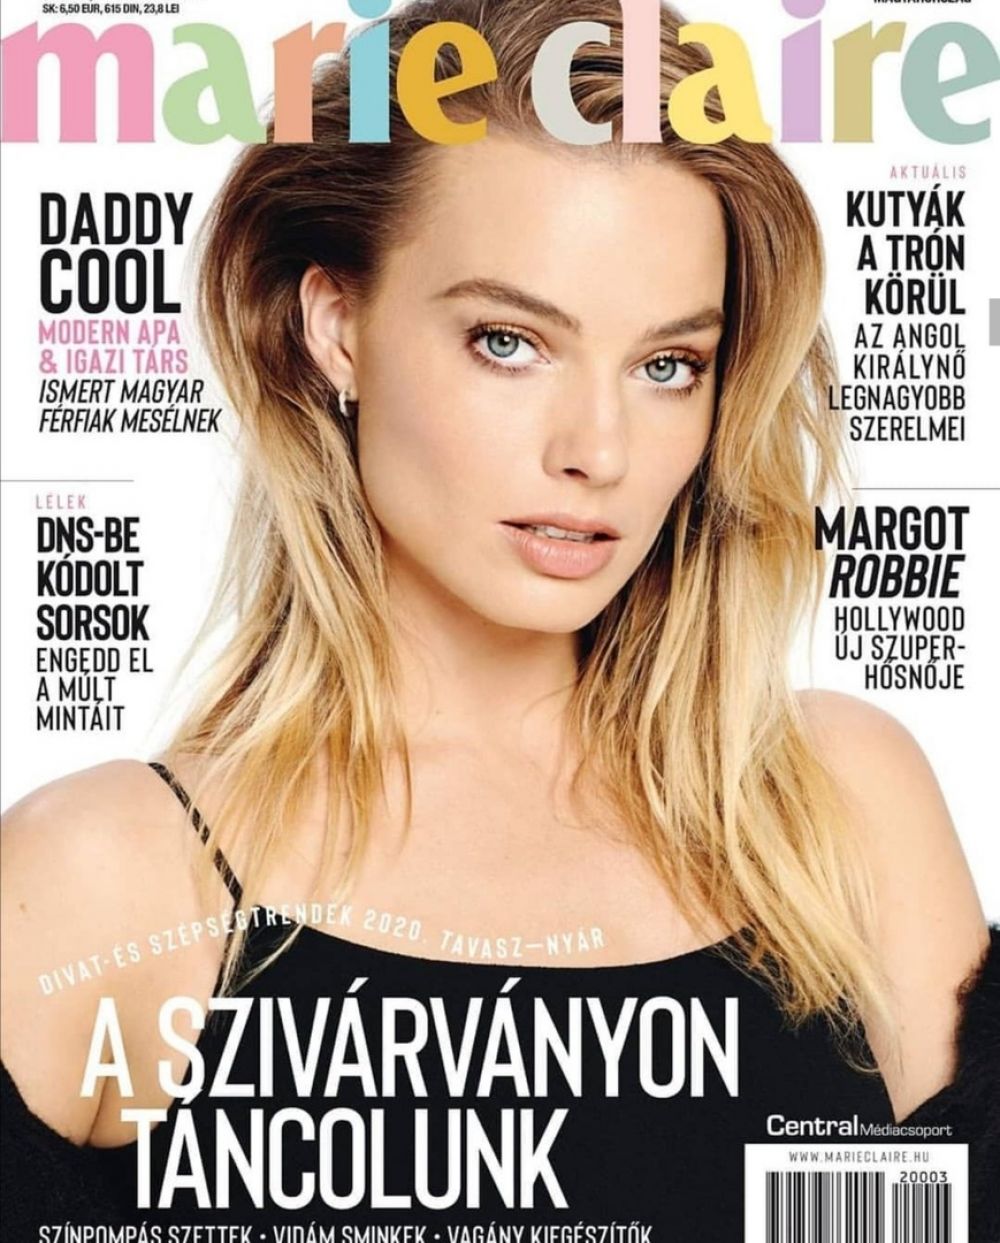 MARGOT ROBBIE on the Cover of Marie Claire Magazine, Hungary February